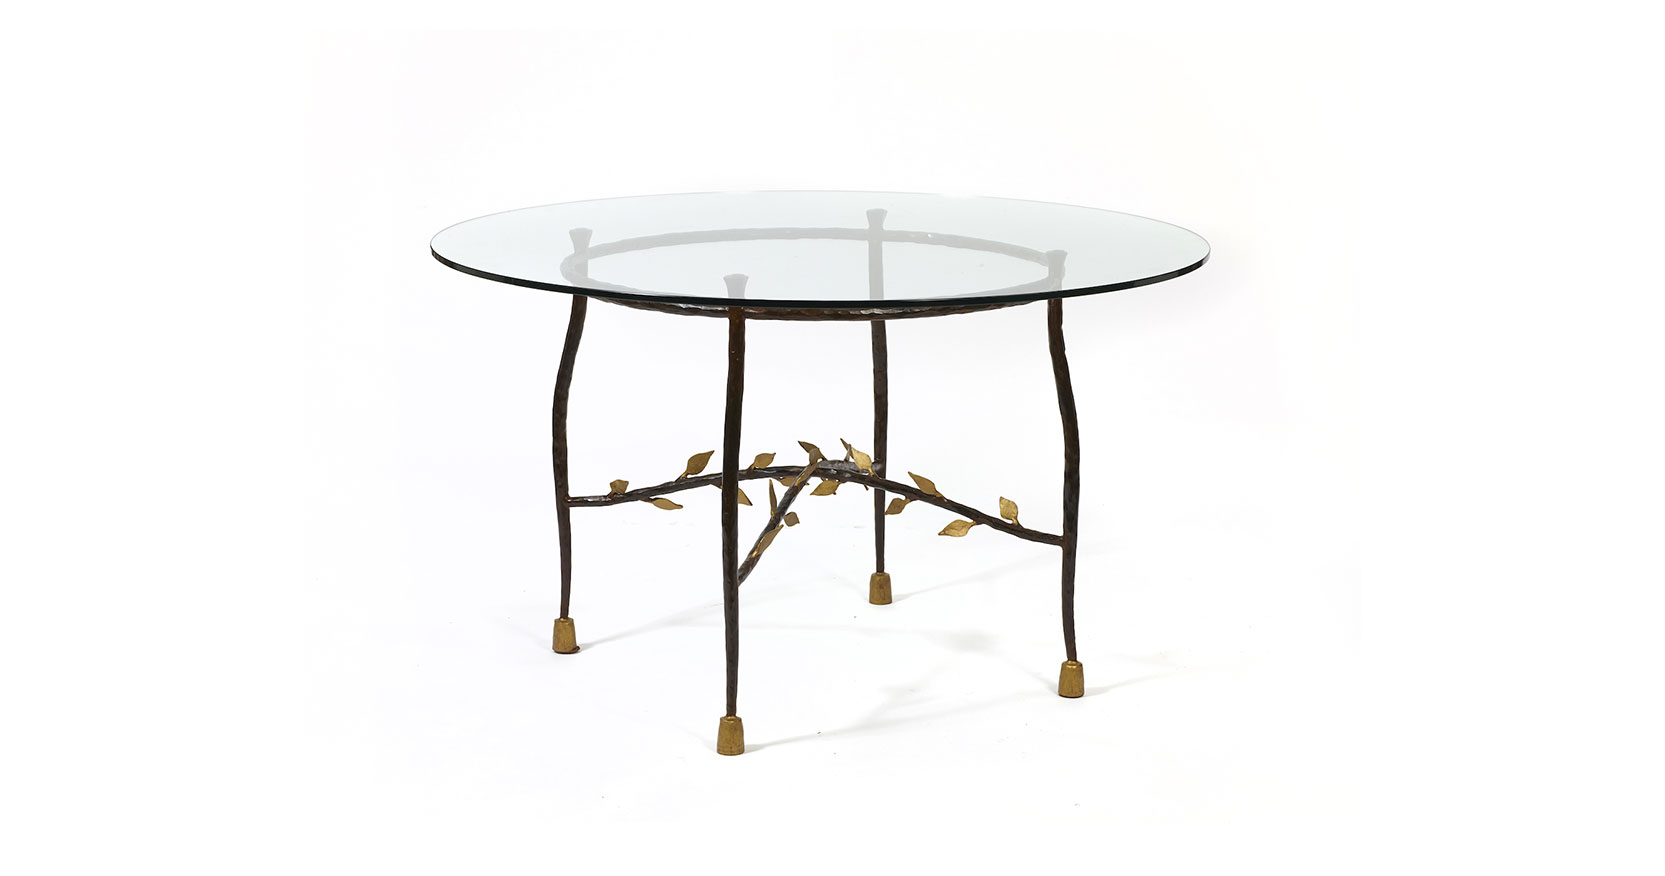 Garouste Bonetti, baroque round dining table, curved black wrought iron legs and small gold feet, punctuated with small gold wrought iron leaves, glass top